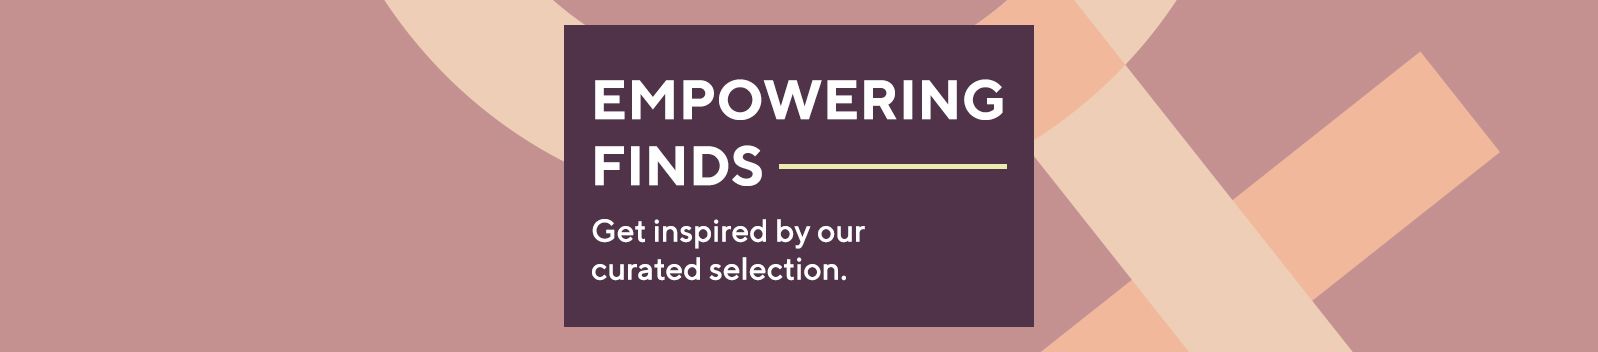 Empowering Finds: Get inspired by our curated selection. 